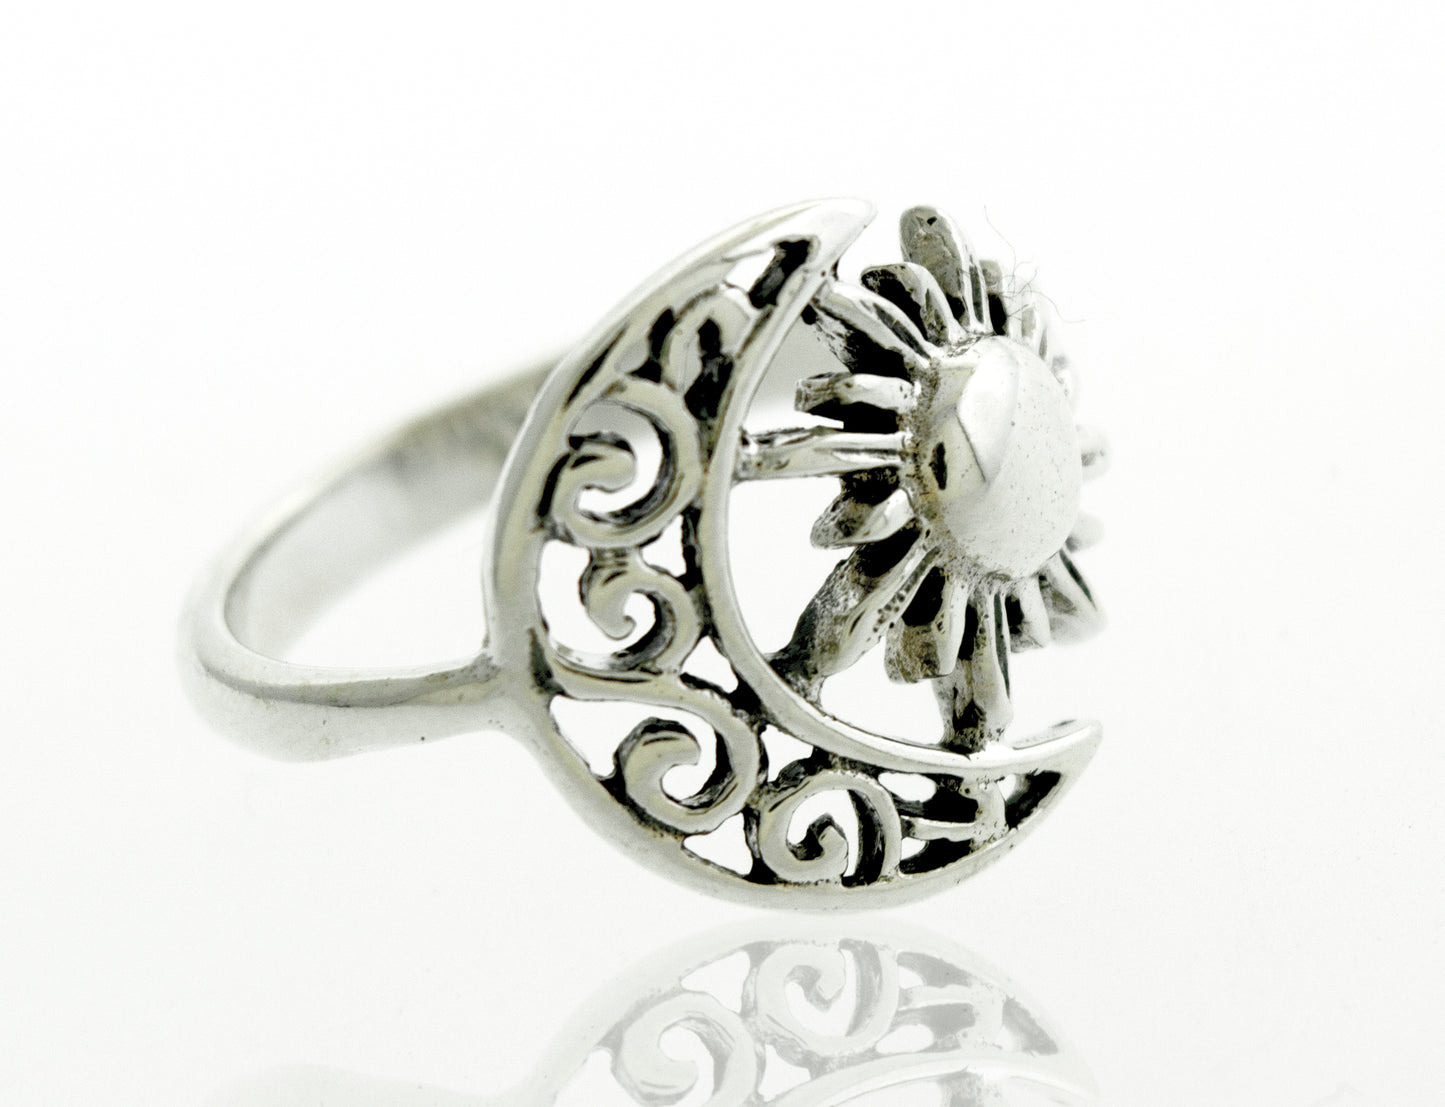 A Moon And Sun Ring With Swirl Design adorned with a celestial moon and sun design.